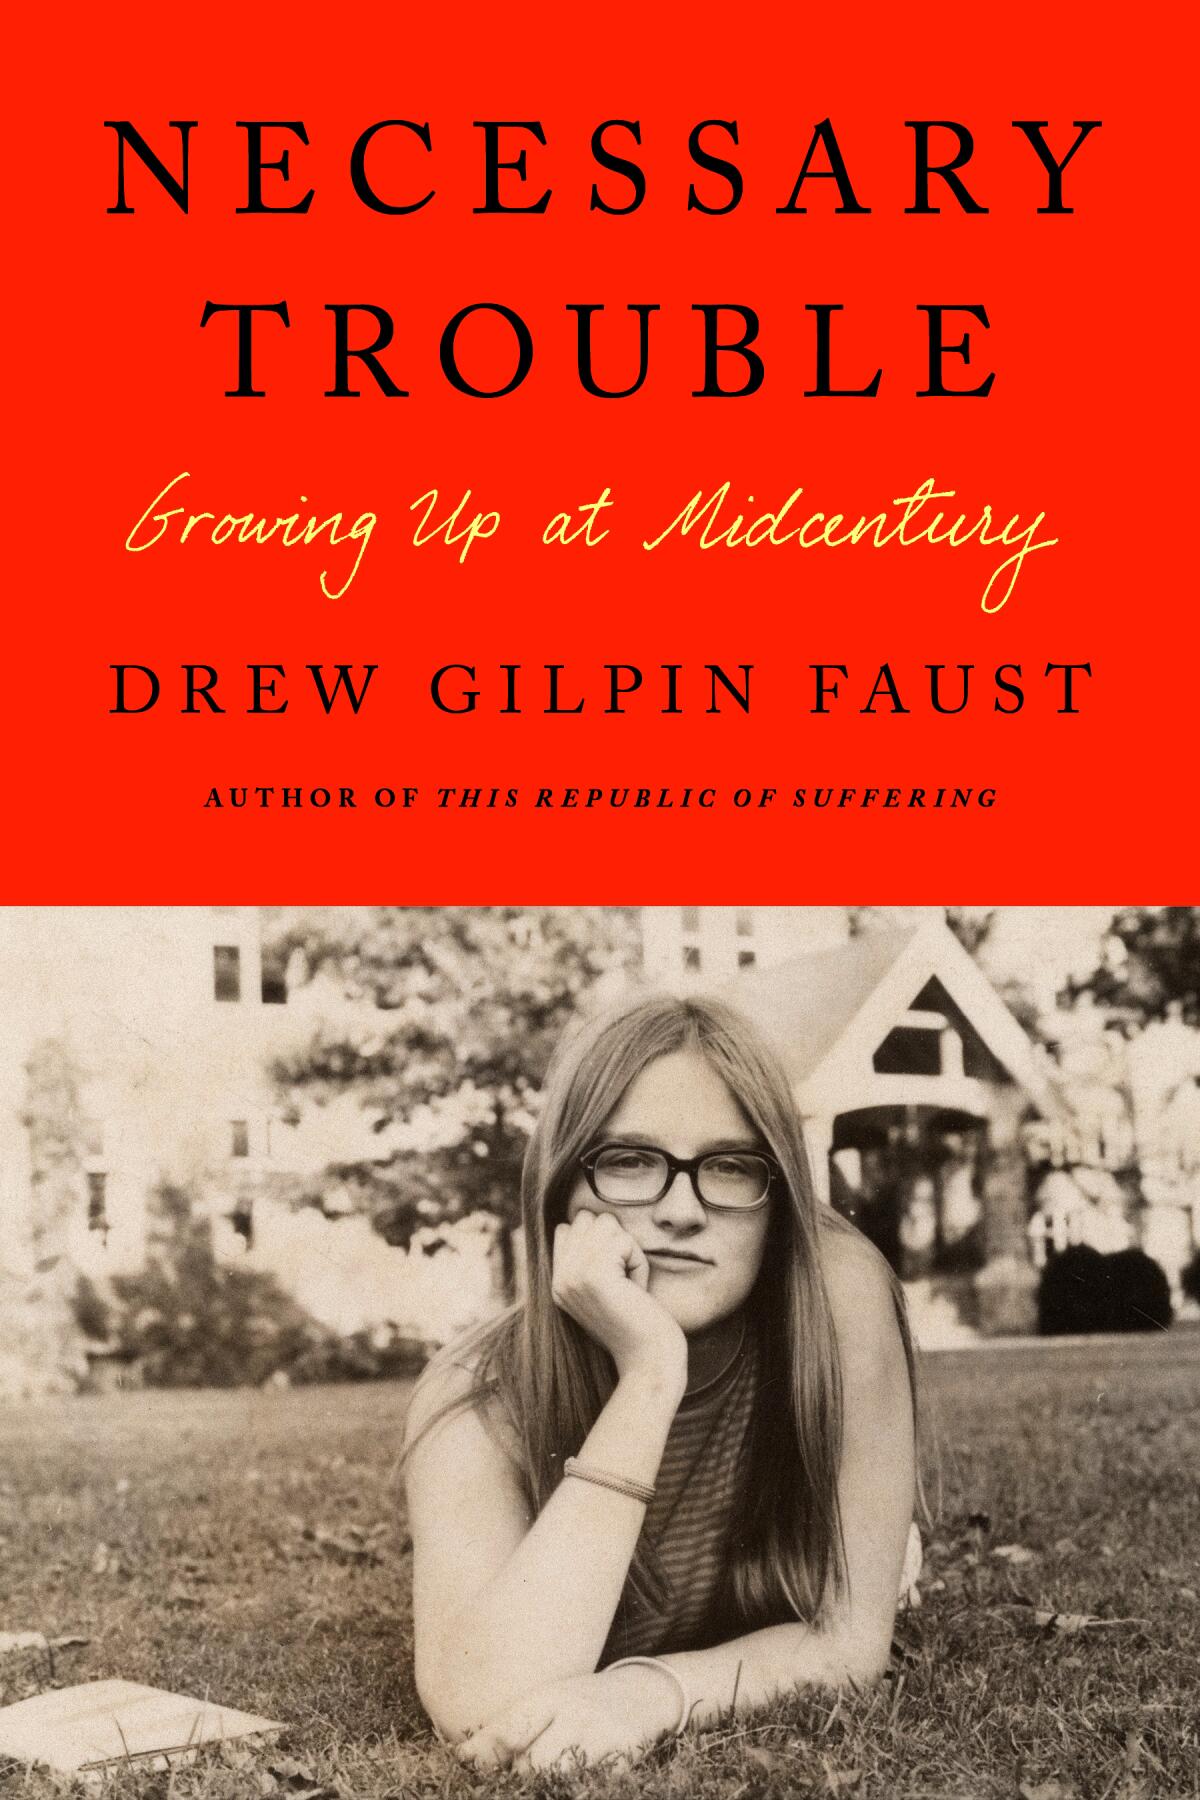 "Necessary Trouble" by Drew Gilpin Faust features a black-and-white photo of a young Faust on the cover.